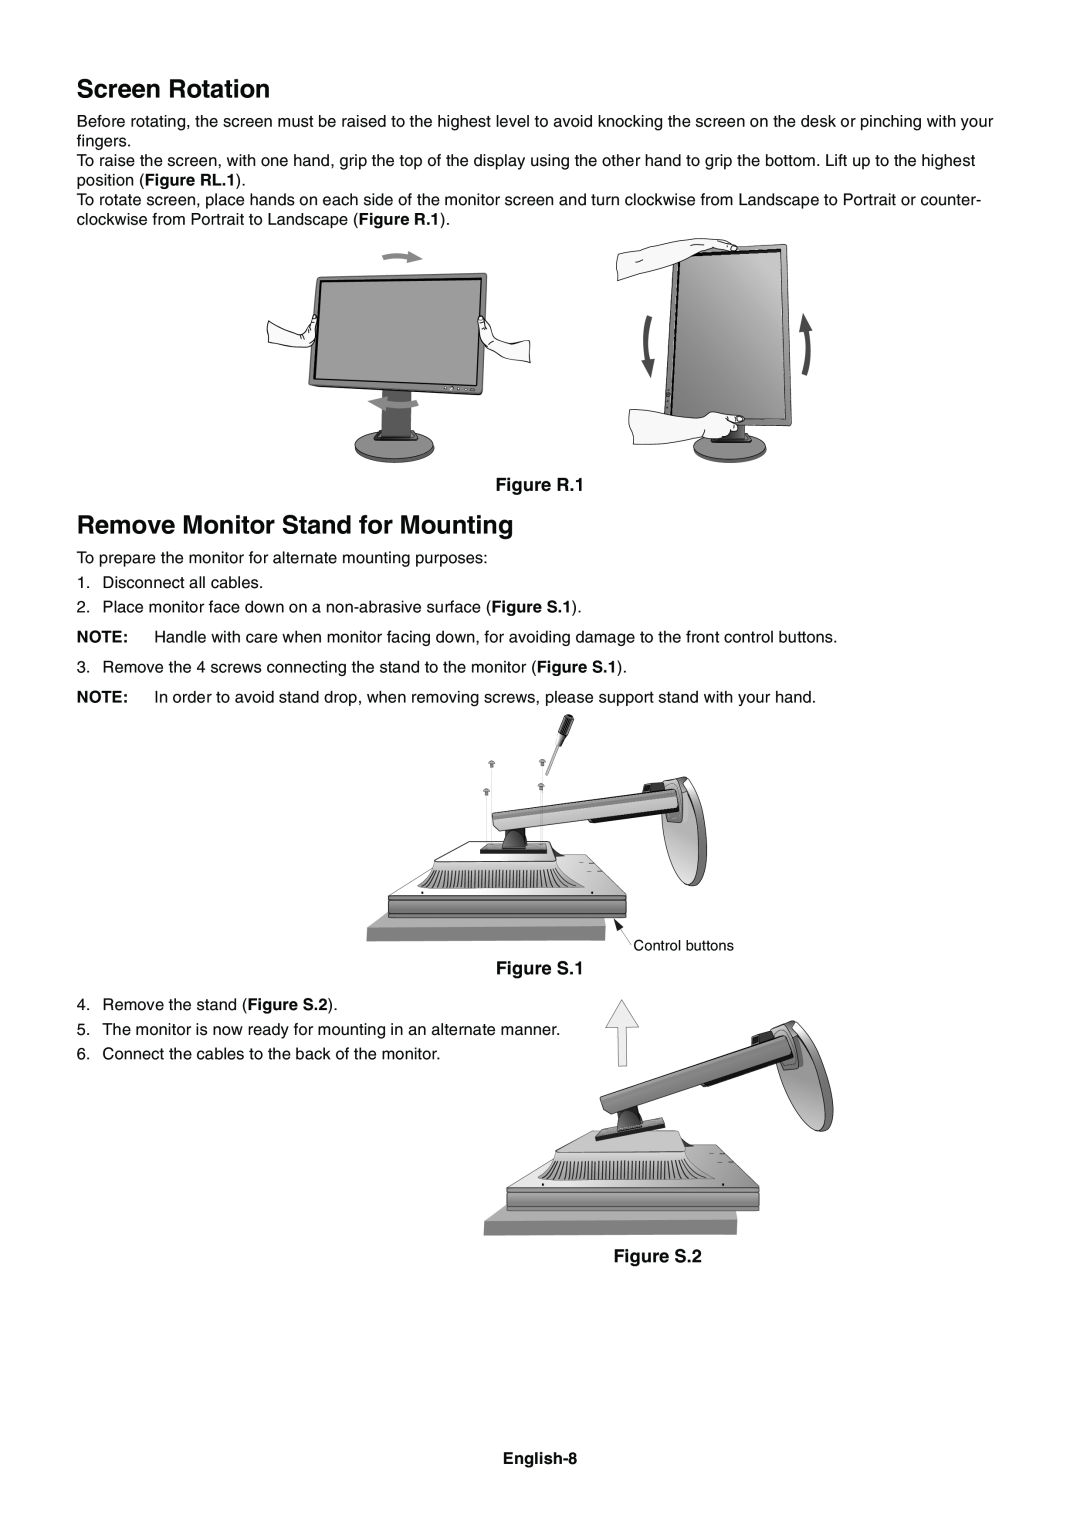 NEC E201W user manual Screen Rotation, Remove Monitor Stand for Mounting, Figure R.1, Figure S.1, Figure S.2 